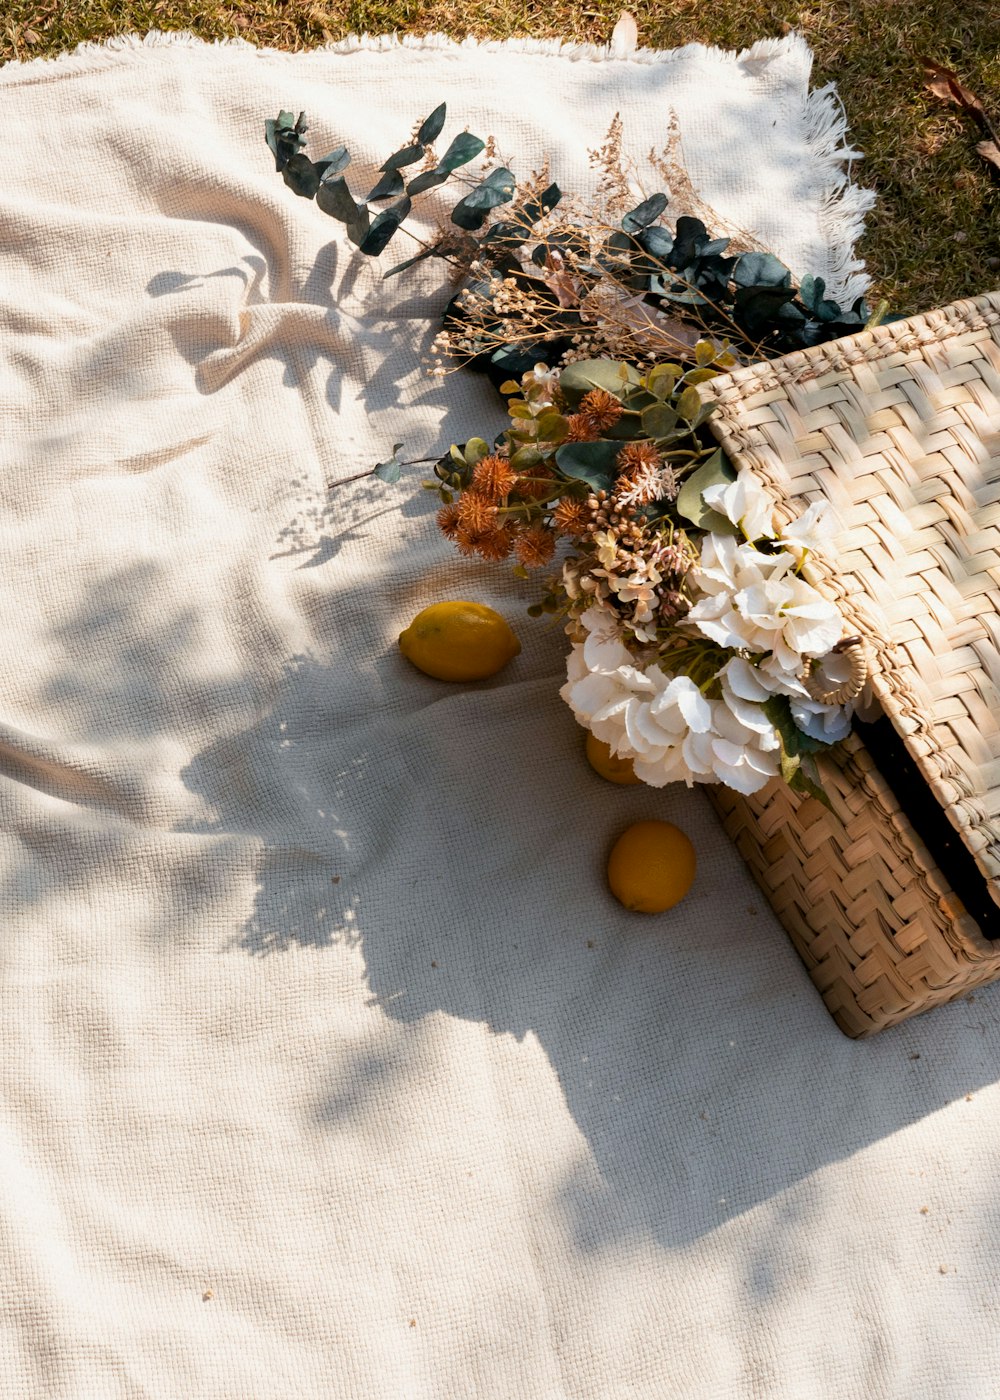 a wicker picnic basket with flowers on a blanket